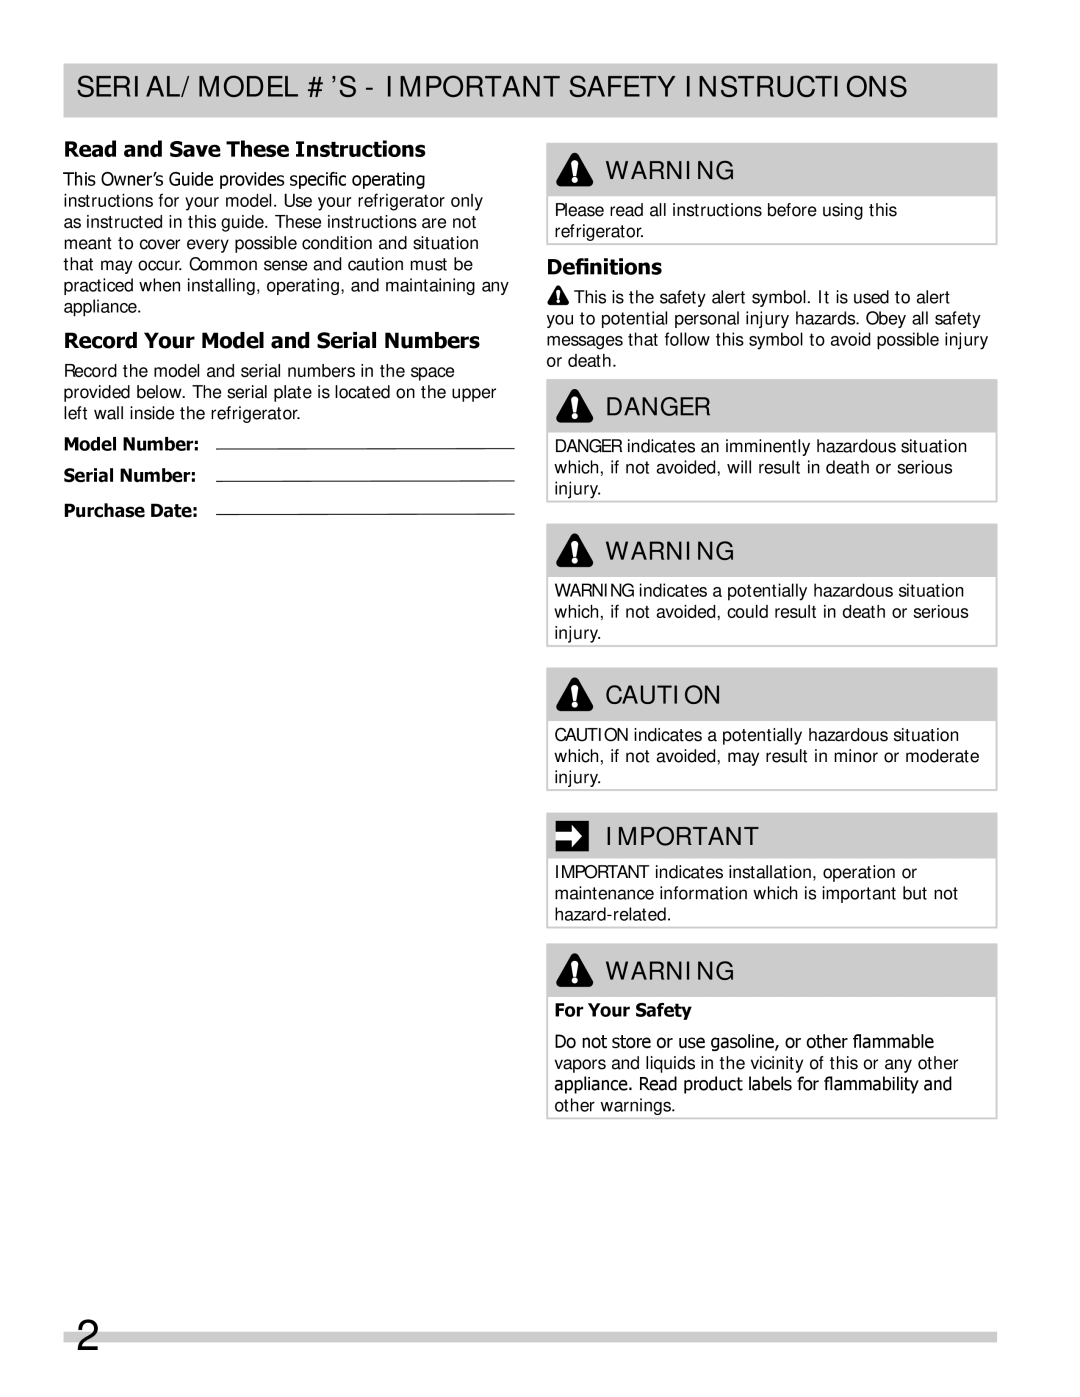 Frigidaire FFPT12F3MM SERIAL/MODEL #’S - Important Safety Instructions, Danger, Read and Save These Instructions 